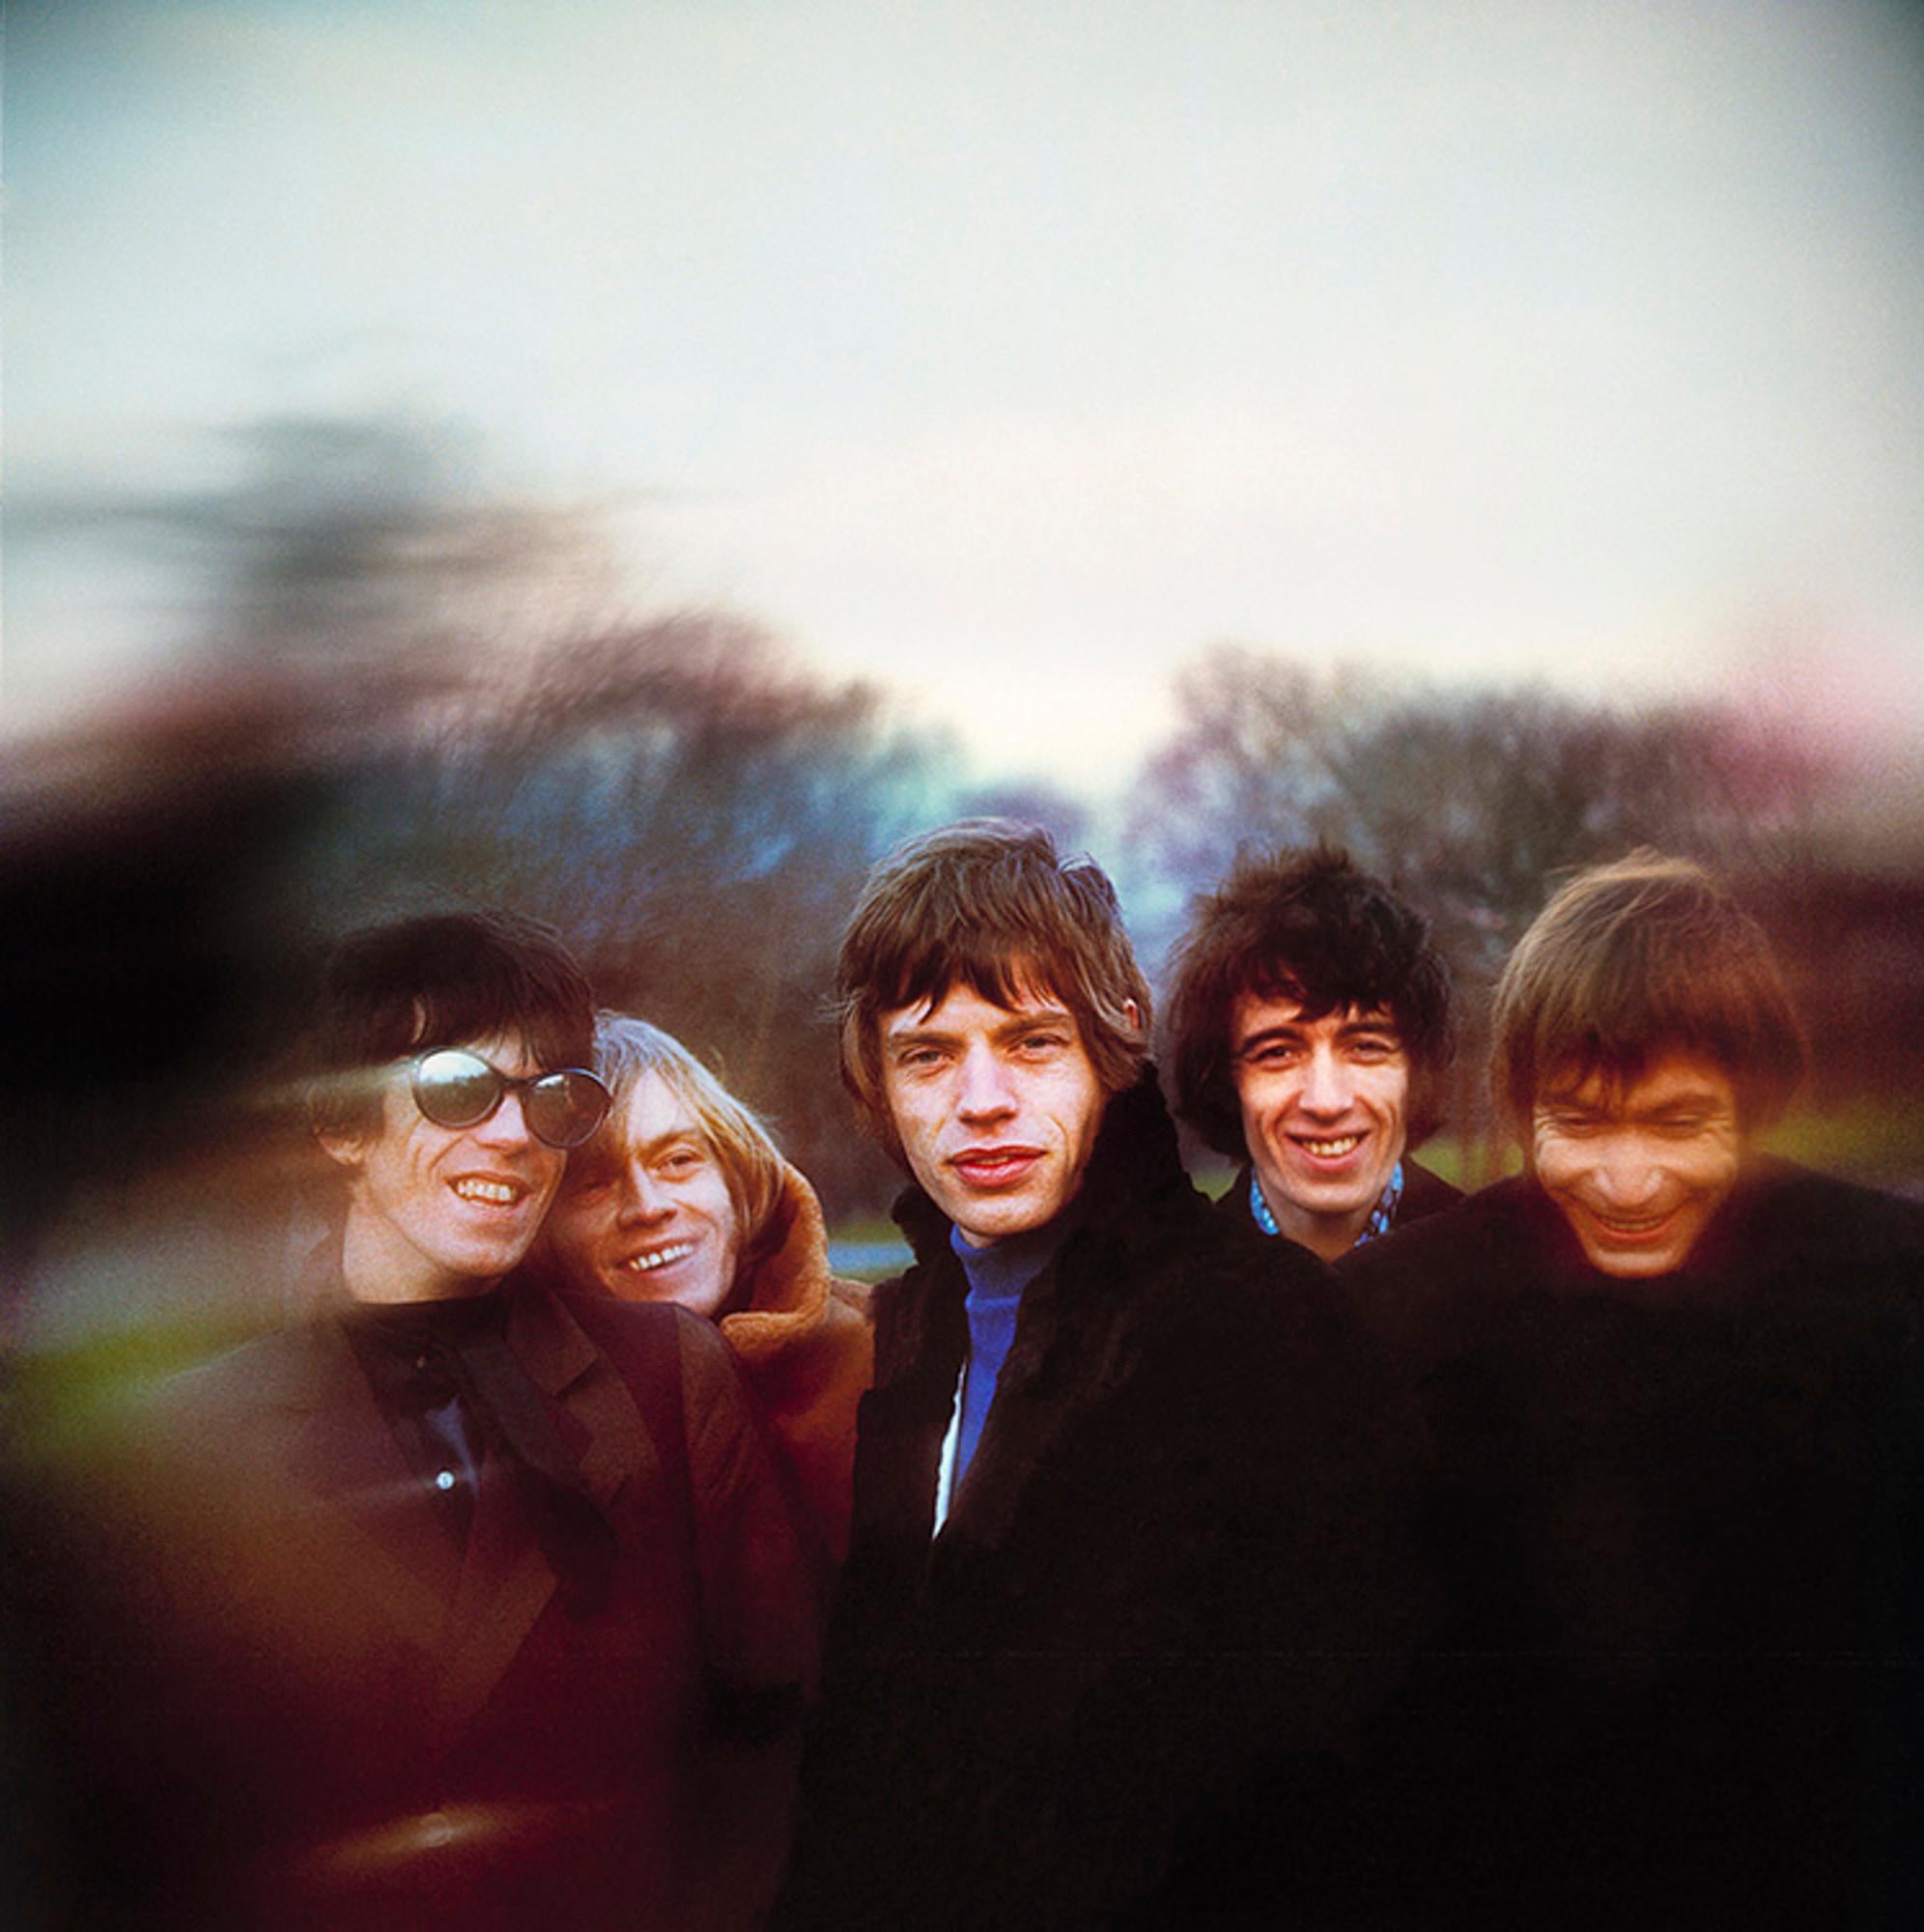 C-type print signed and numbered by Gered Mankowitz

British rock band The Rolling Stones (Mick Jagger, Keith Richards, Charlie Watts, Bill Wyman and Brian Jones) photographed on Primrose Hill in London, 1966.

Available Sizes:
16" x 20” Edition of